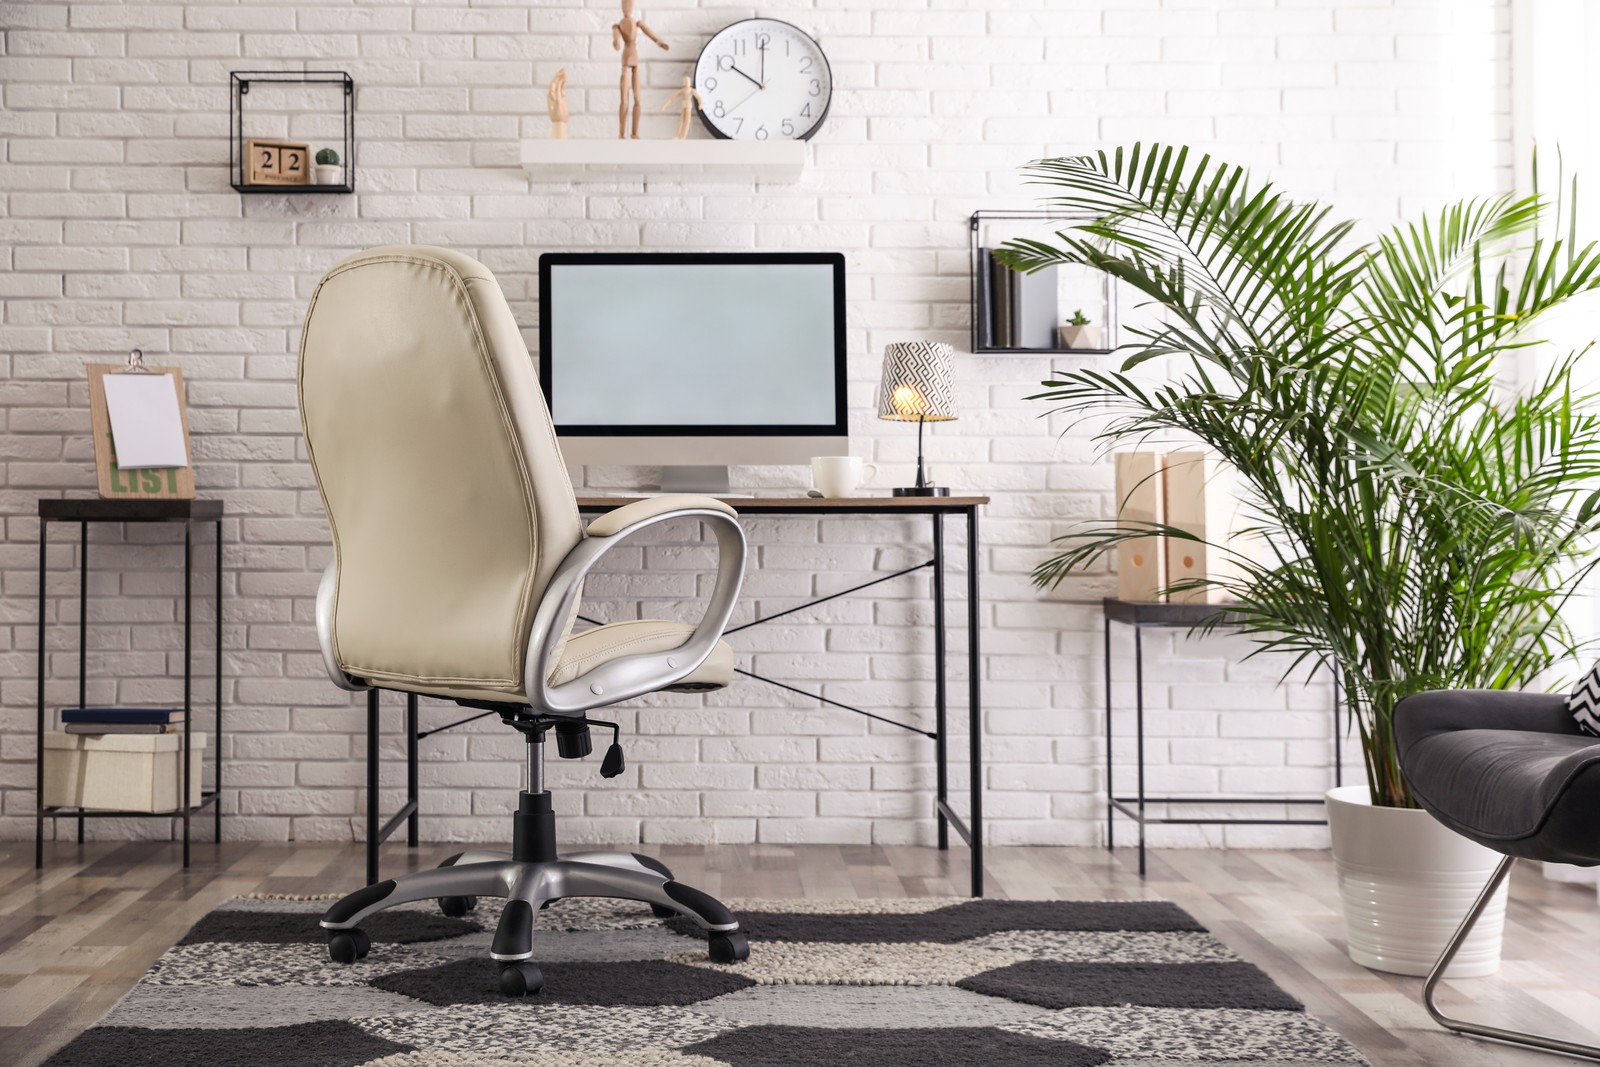 Photo of comfortable chair near desk in modern office interior